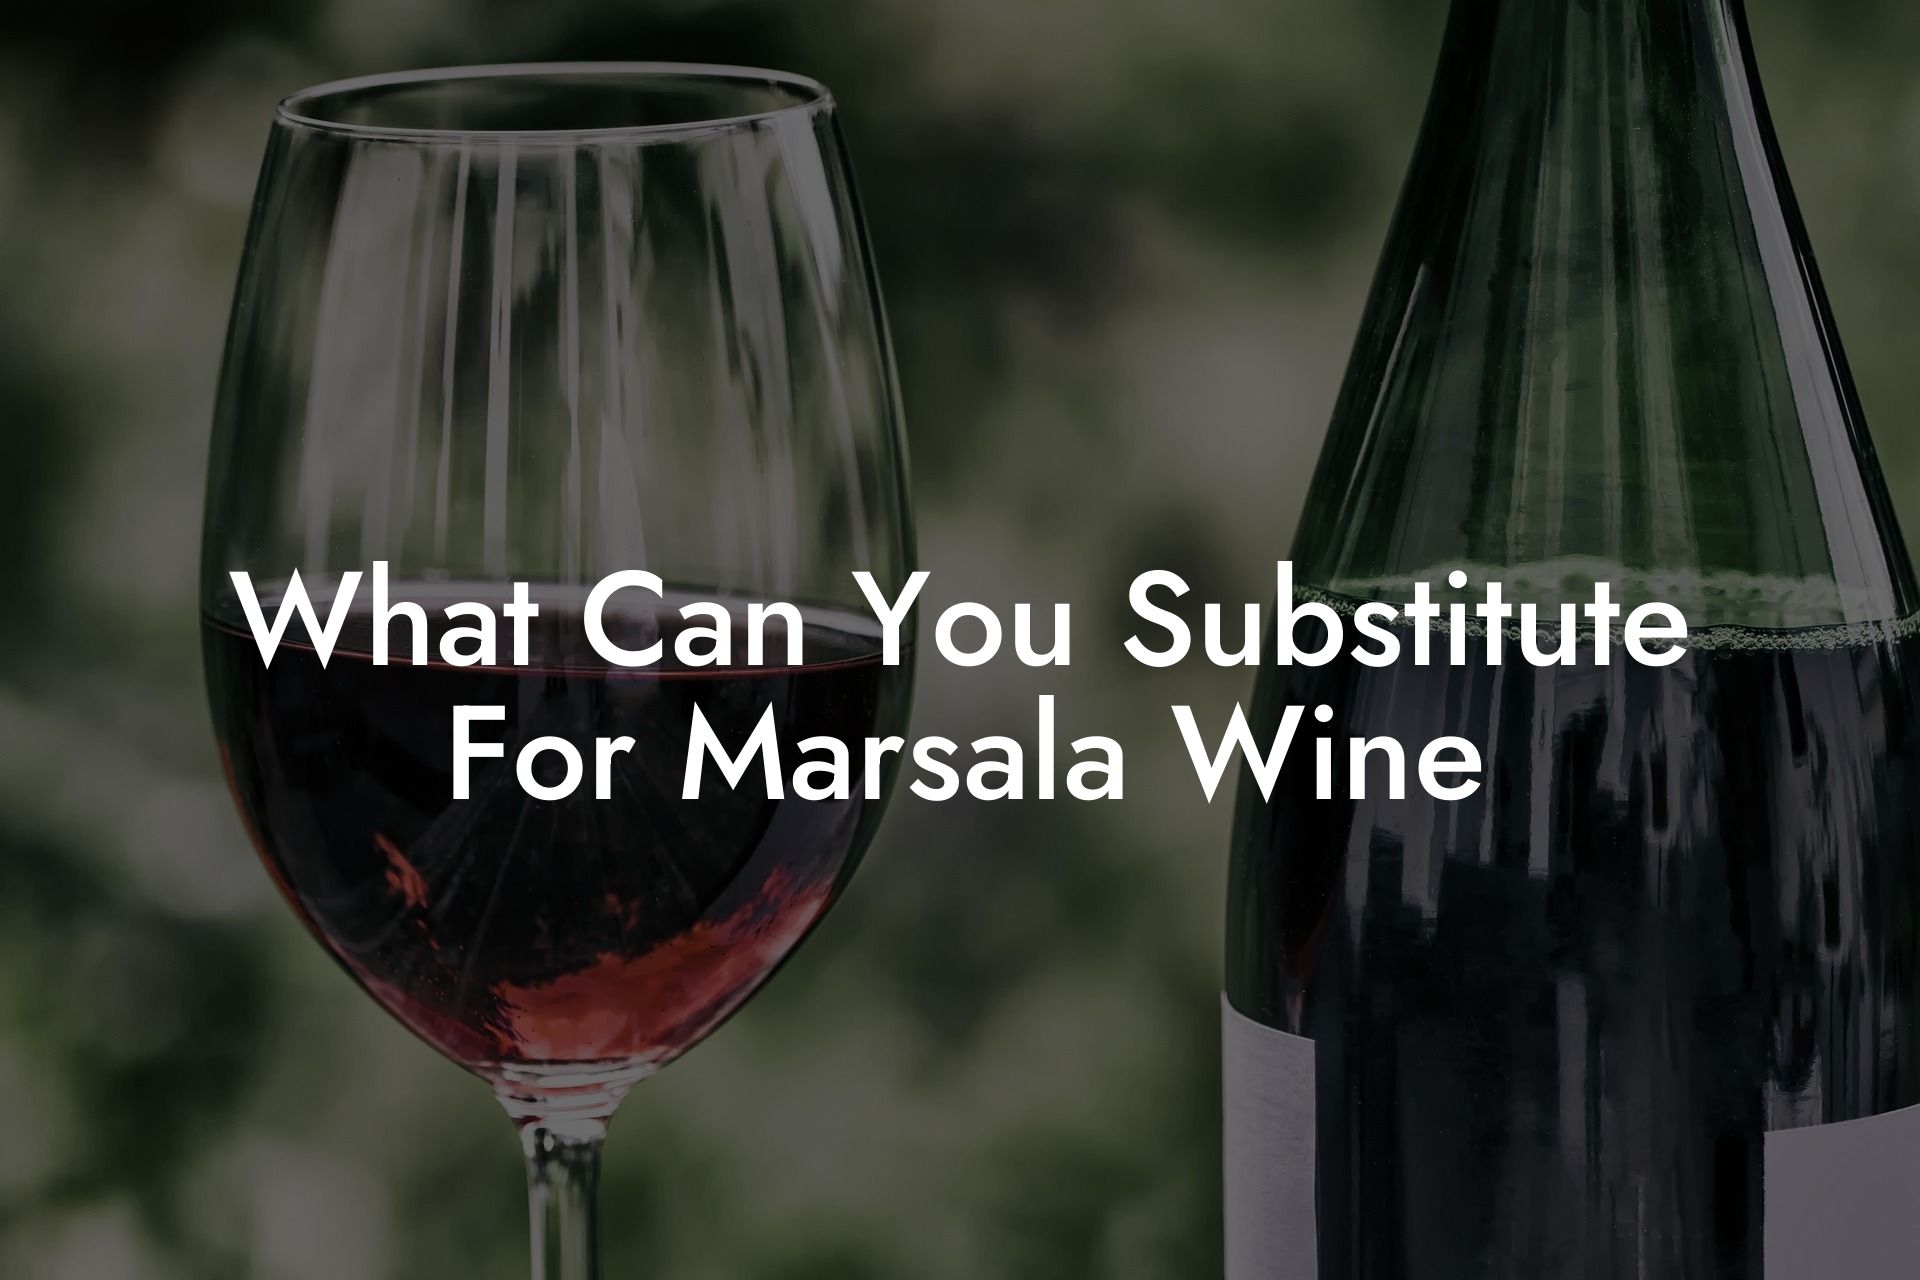 What Can You Substitute For Marsala Wine